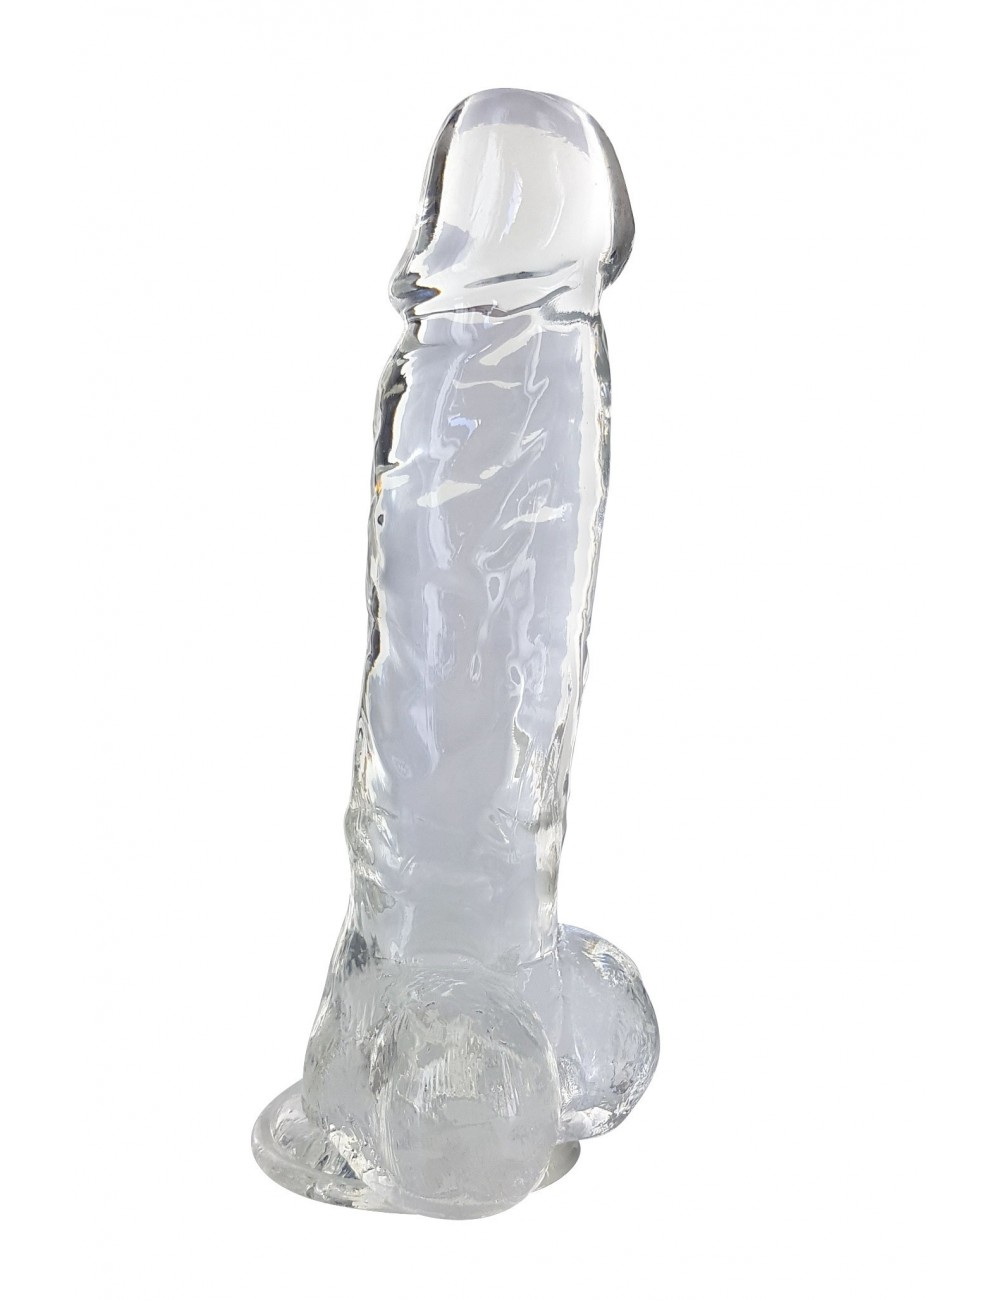 Sextoys - Godes & Plugs - Gode jelly transparent ventouse taille XL 22cm - CC570125 - Pure Jelly